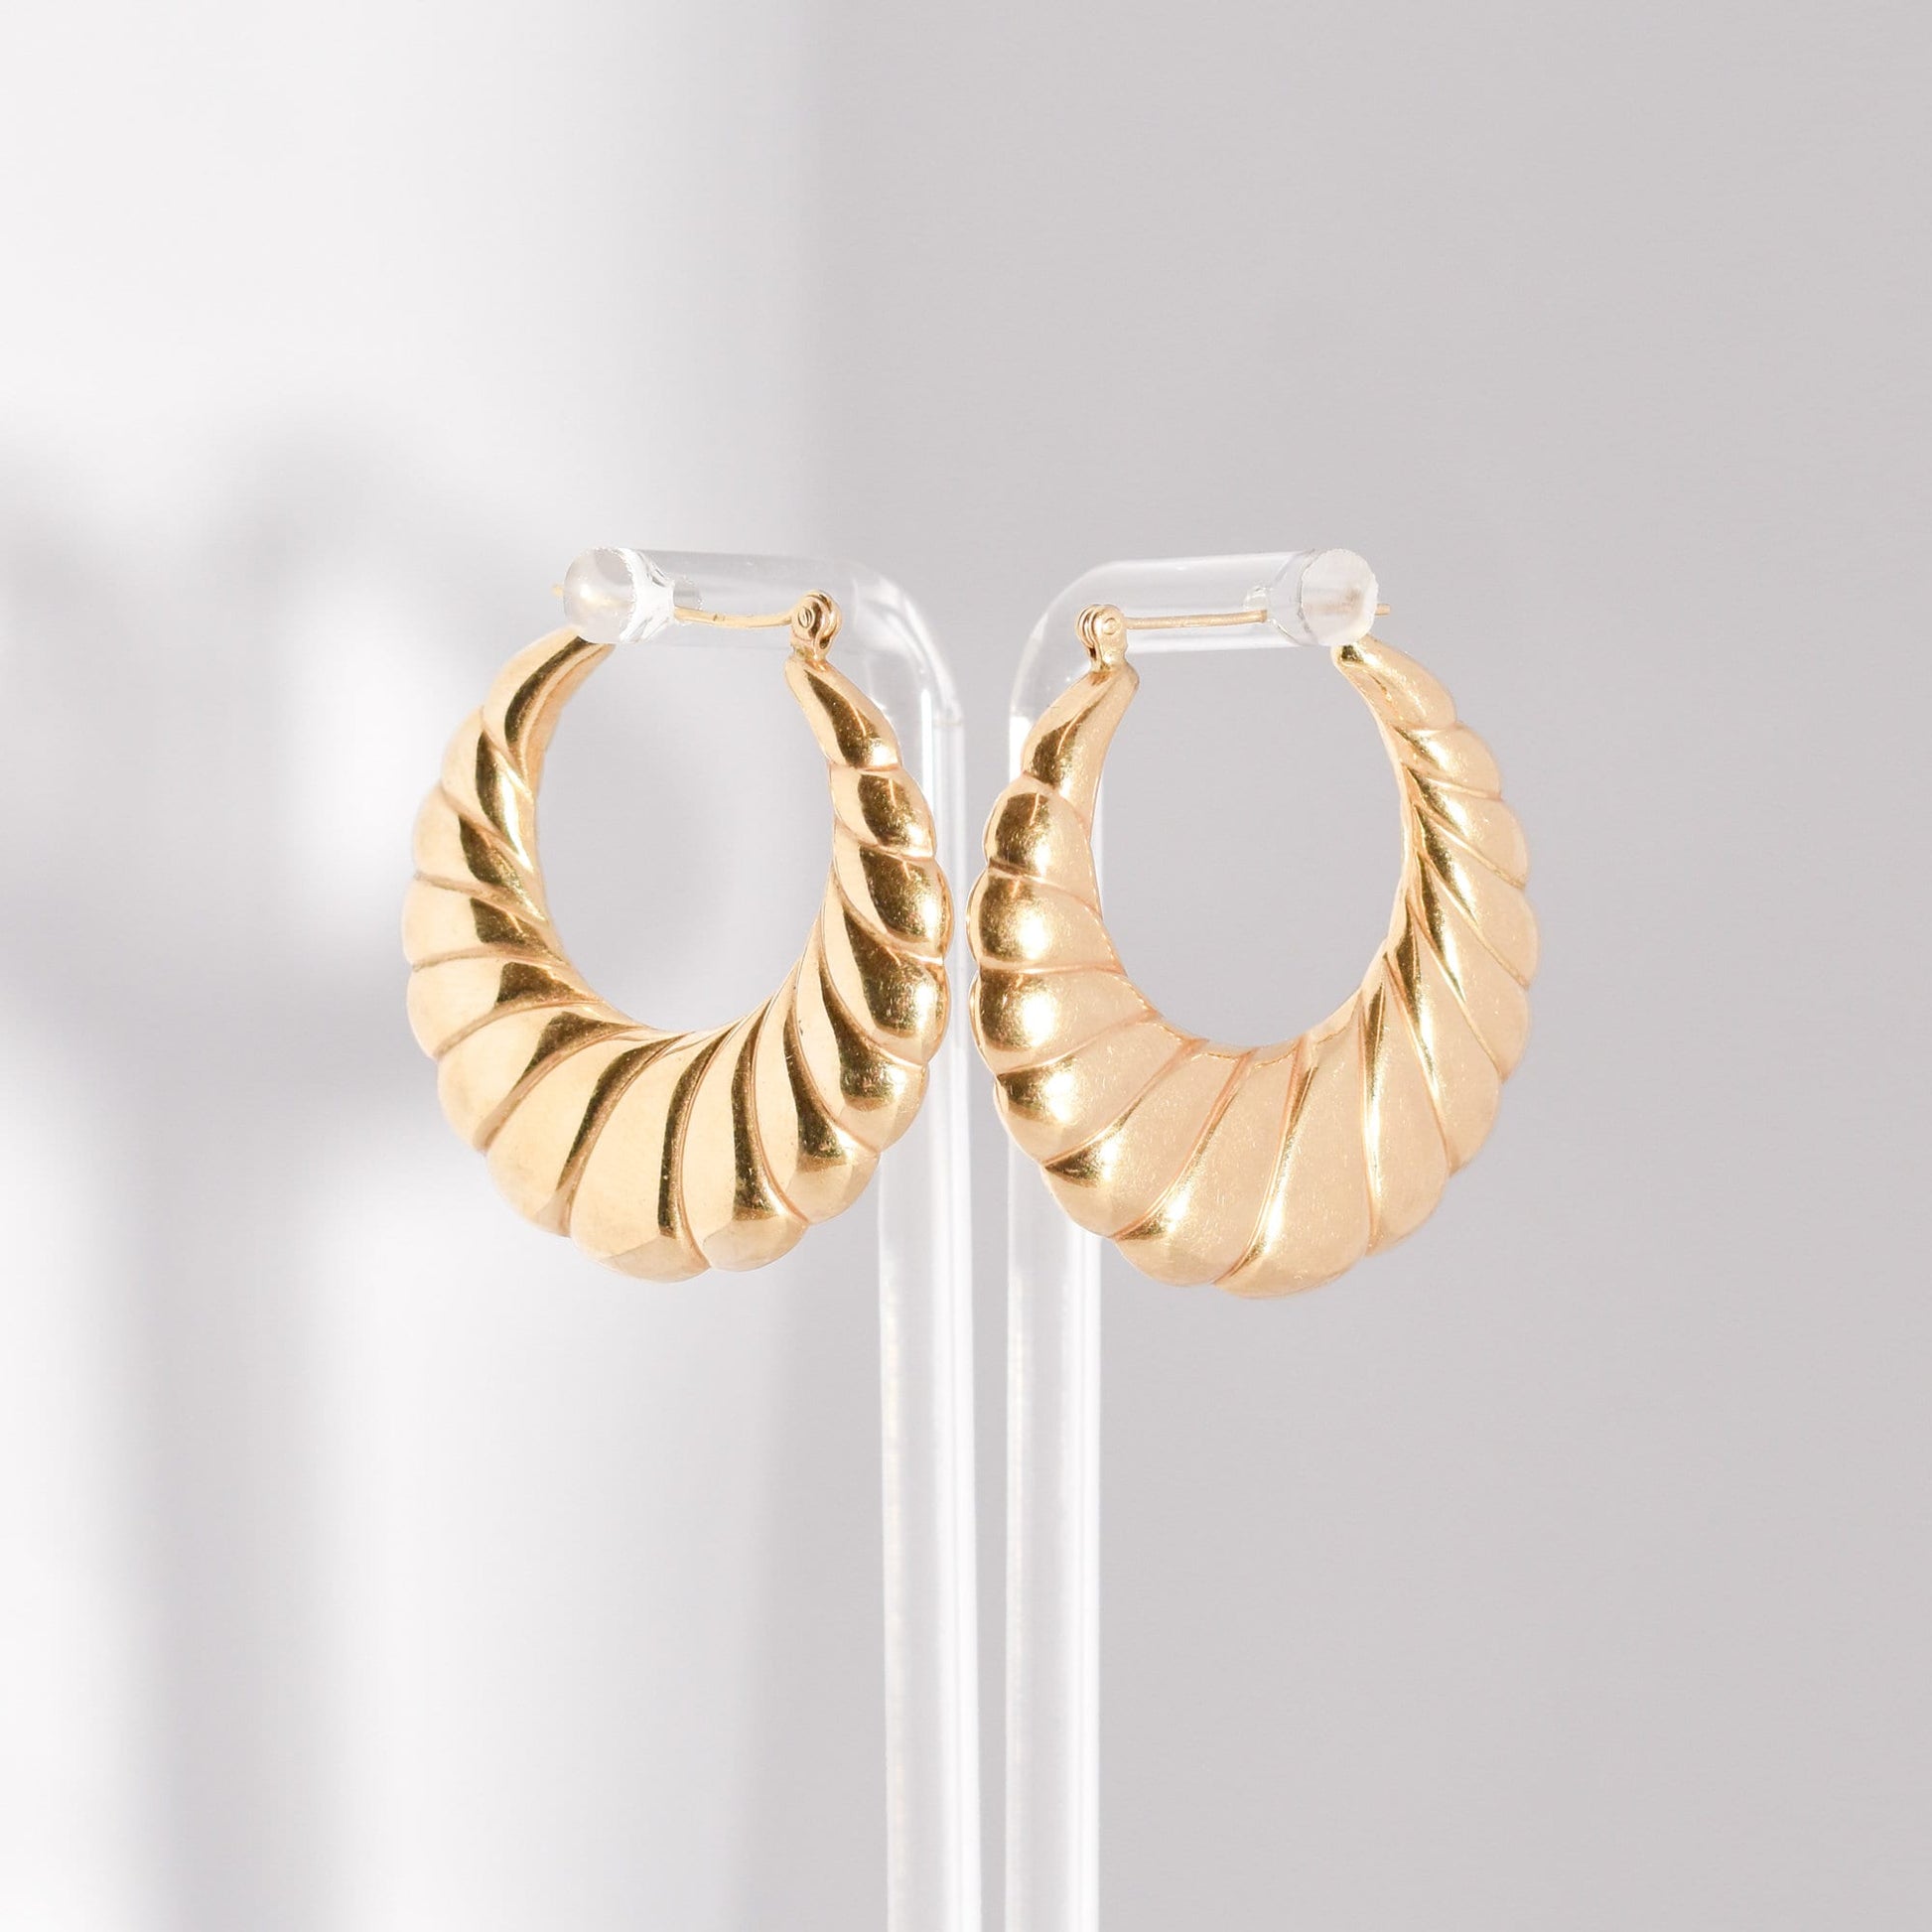 MCM 14K gold puffed scallop hoop earrings medium size on display, 36mm yellow gold estate jewelry.